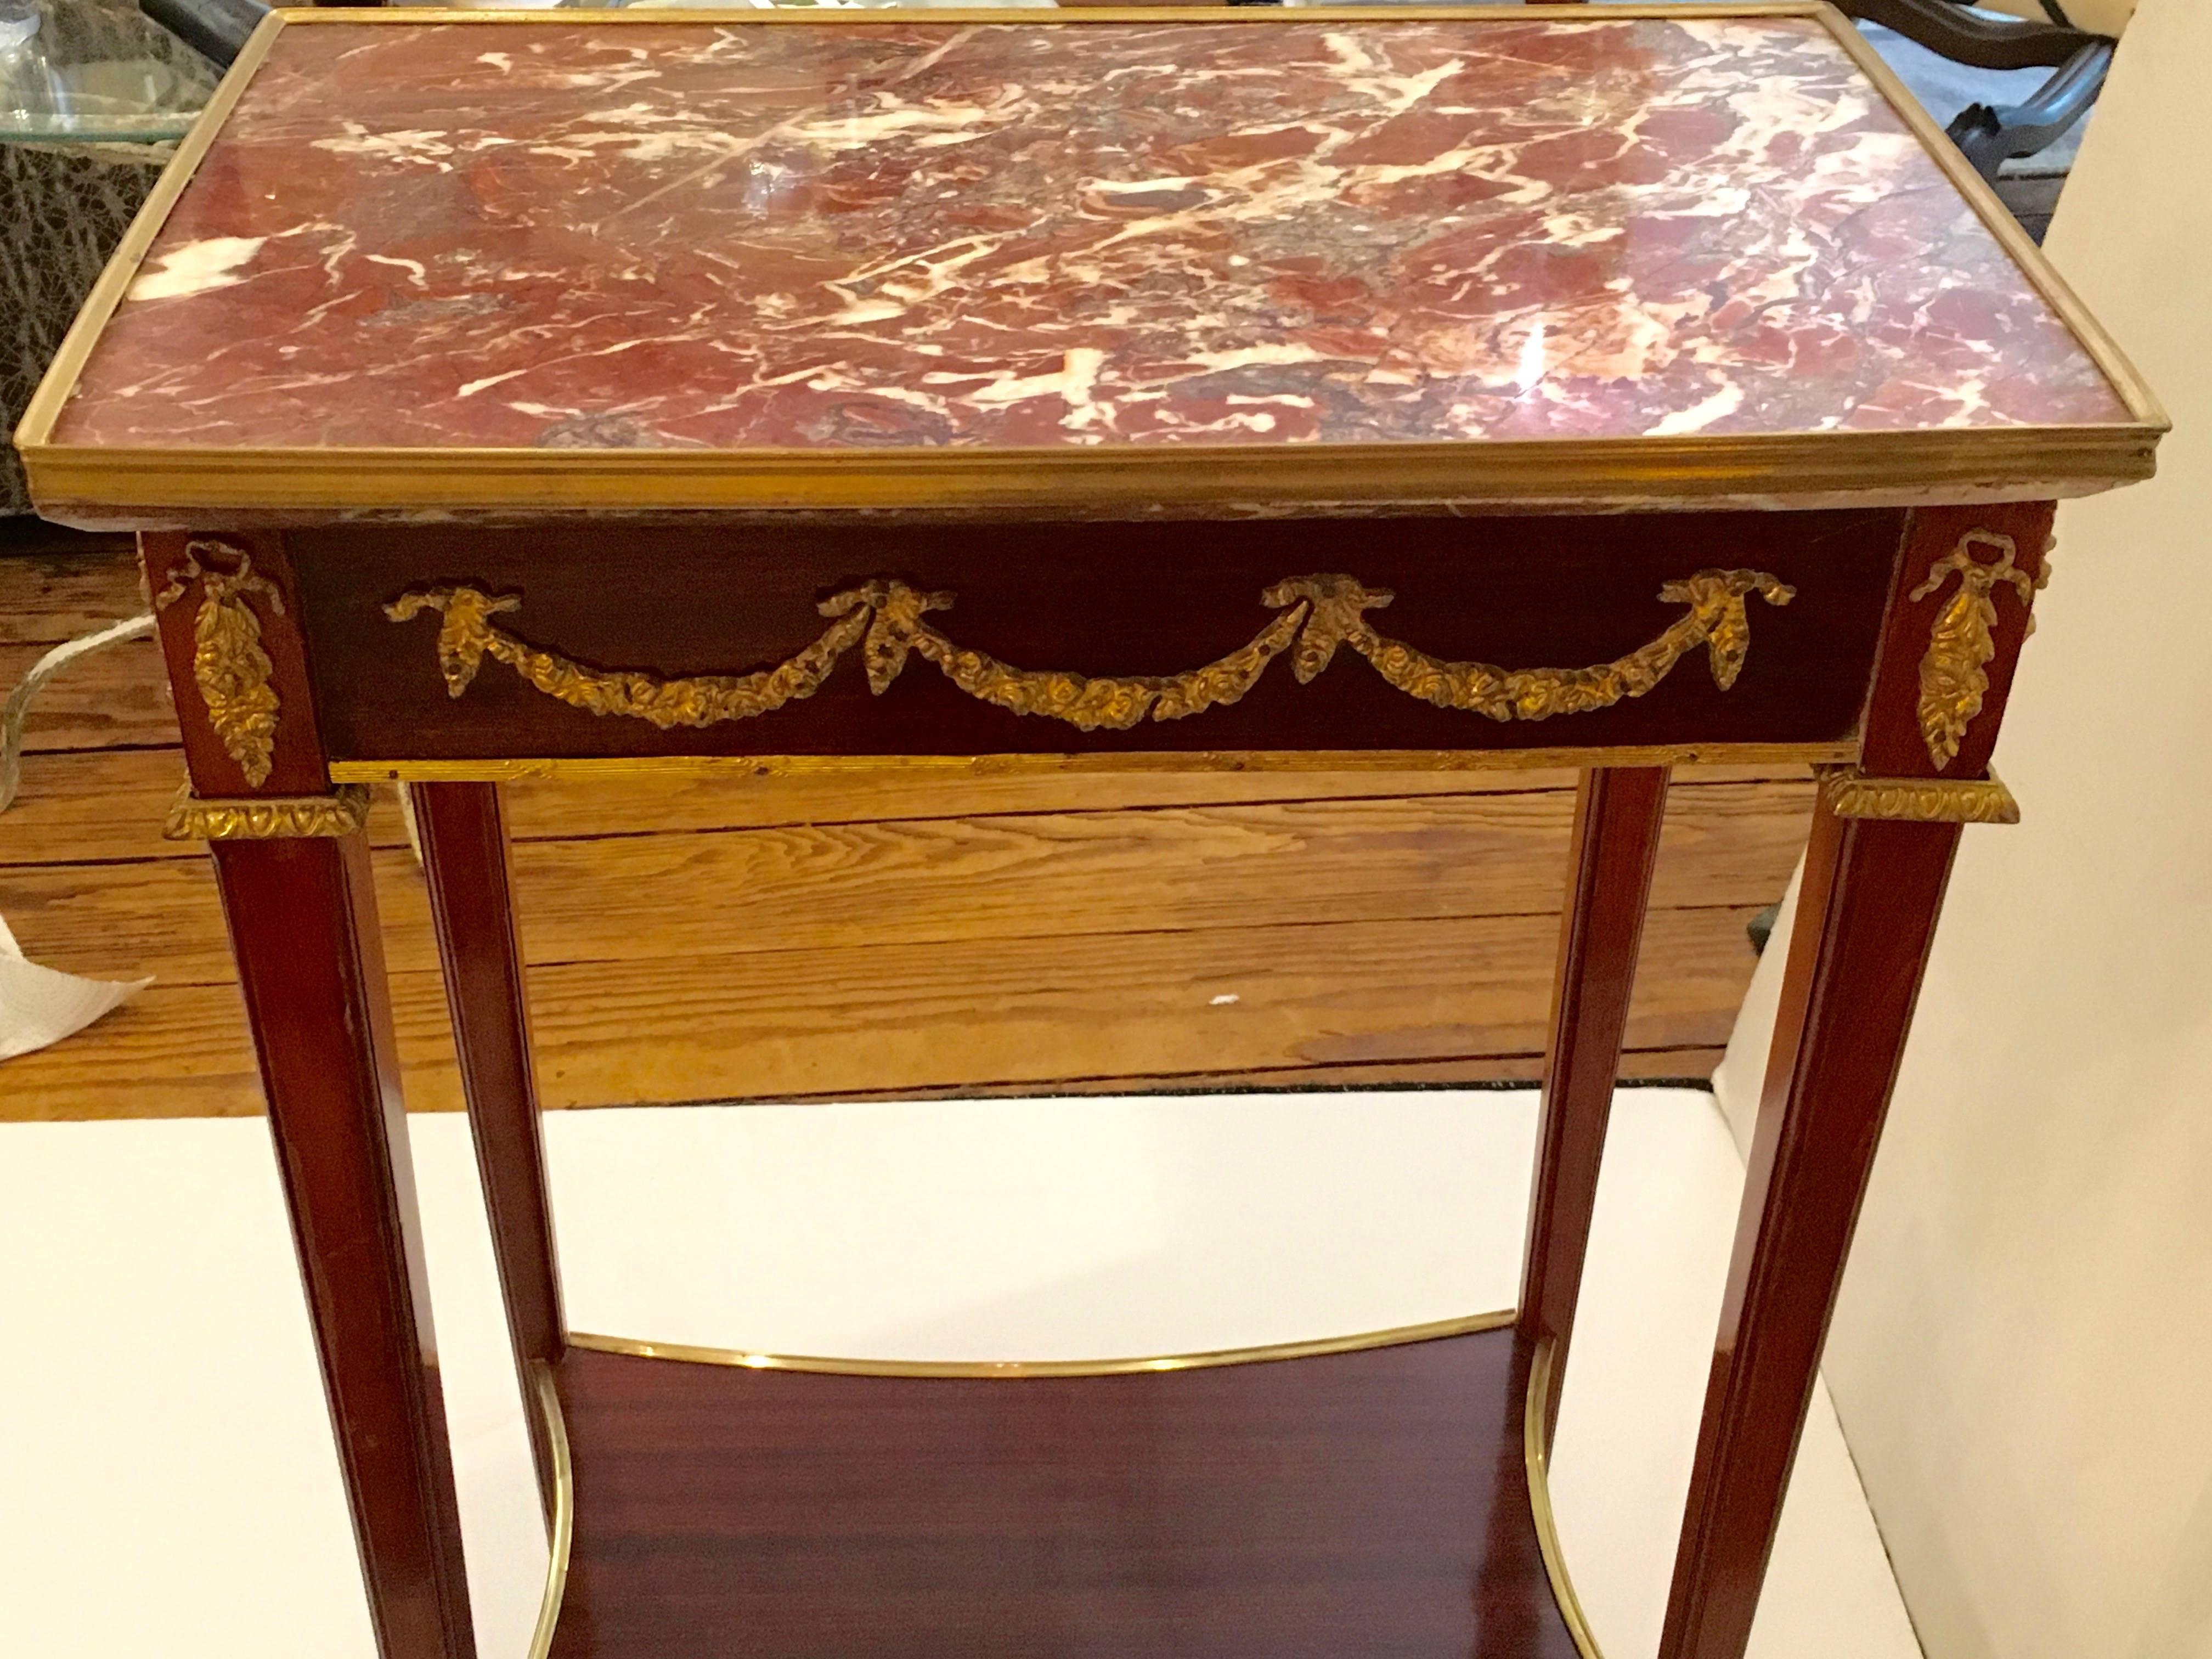 Lovely elongated French style end or side table having thin lovely legs, a second shelf below, cranberry and cream marble top with brass gallery surround and capped feet, topped off with pretty ormalu embellishments.